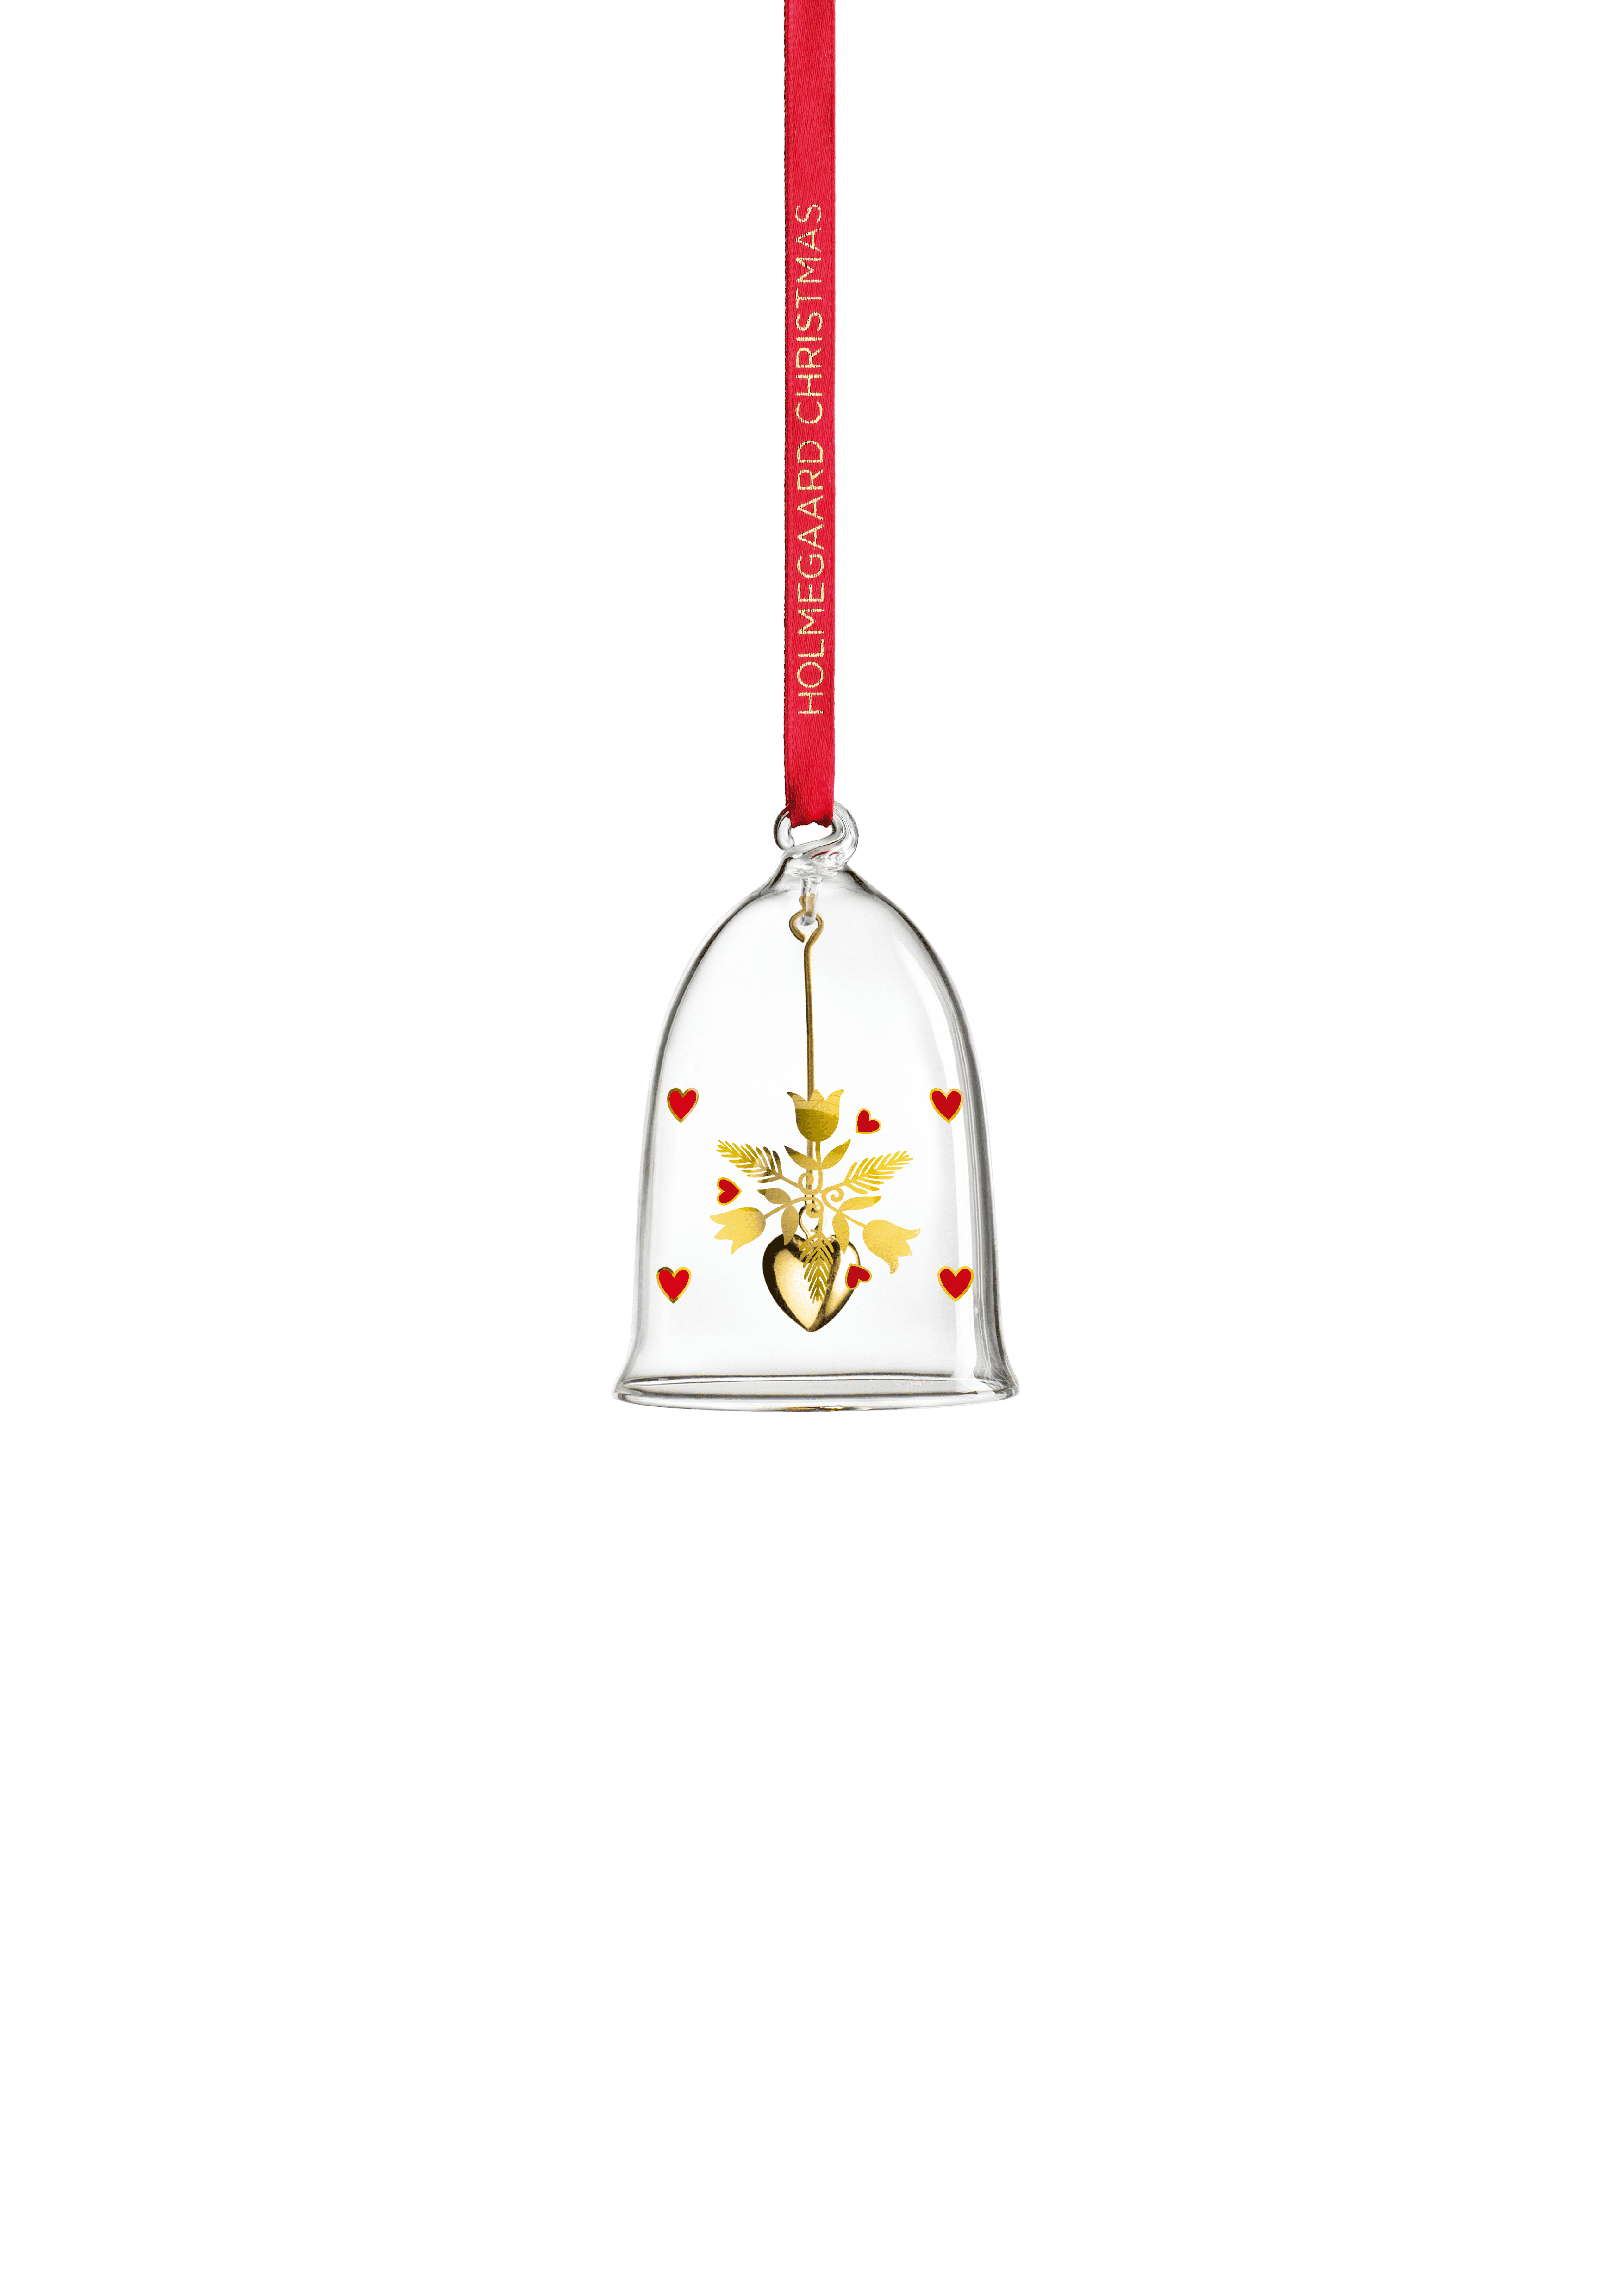 Annual Christmas Bell 2020 small